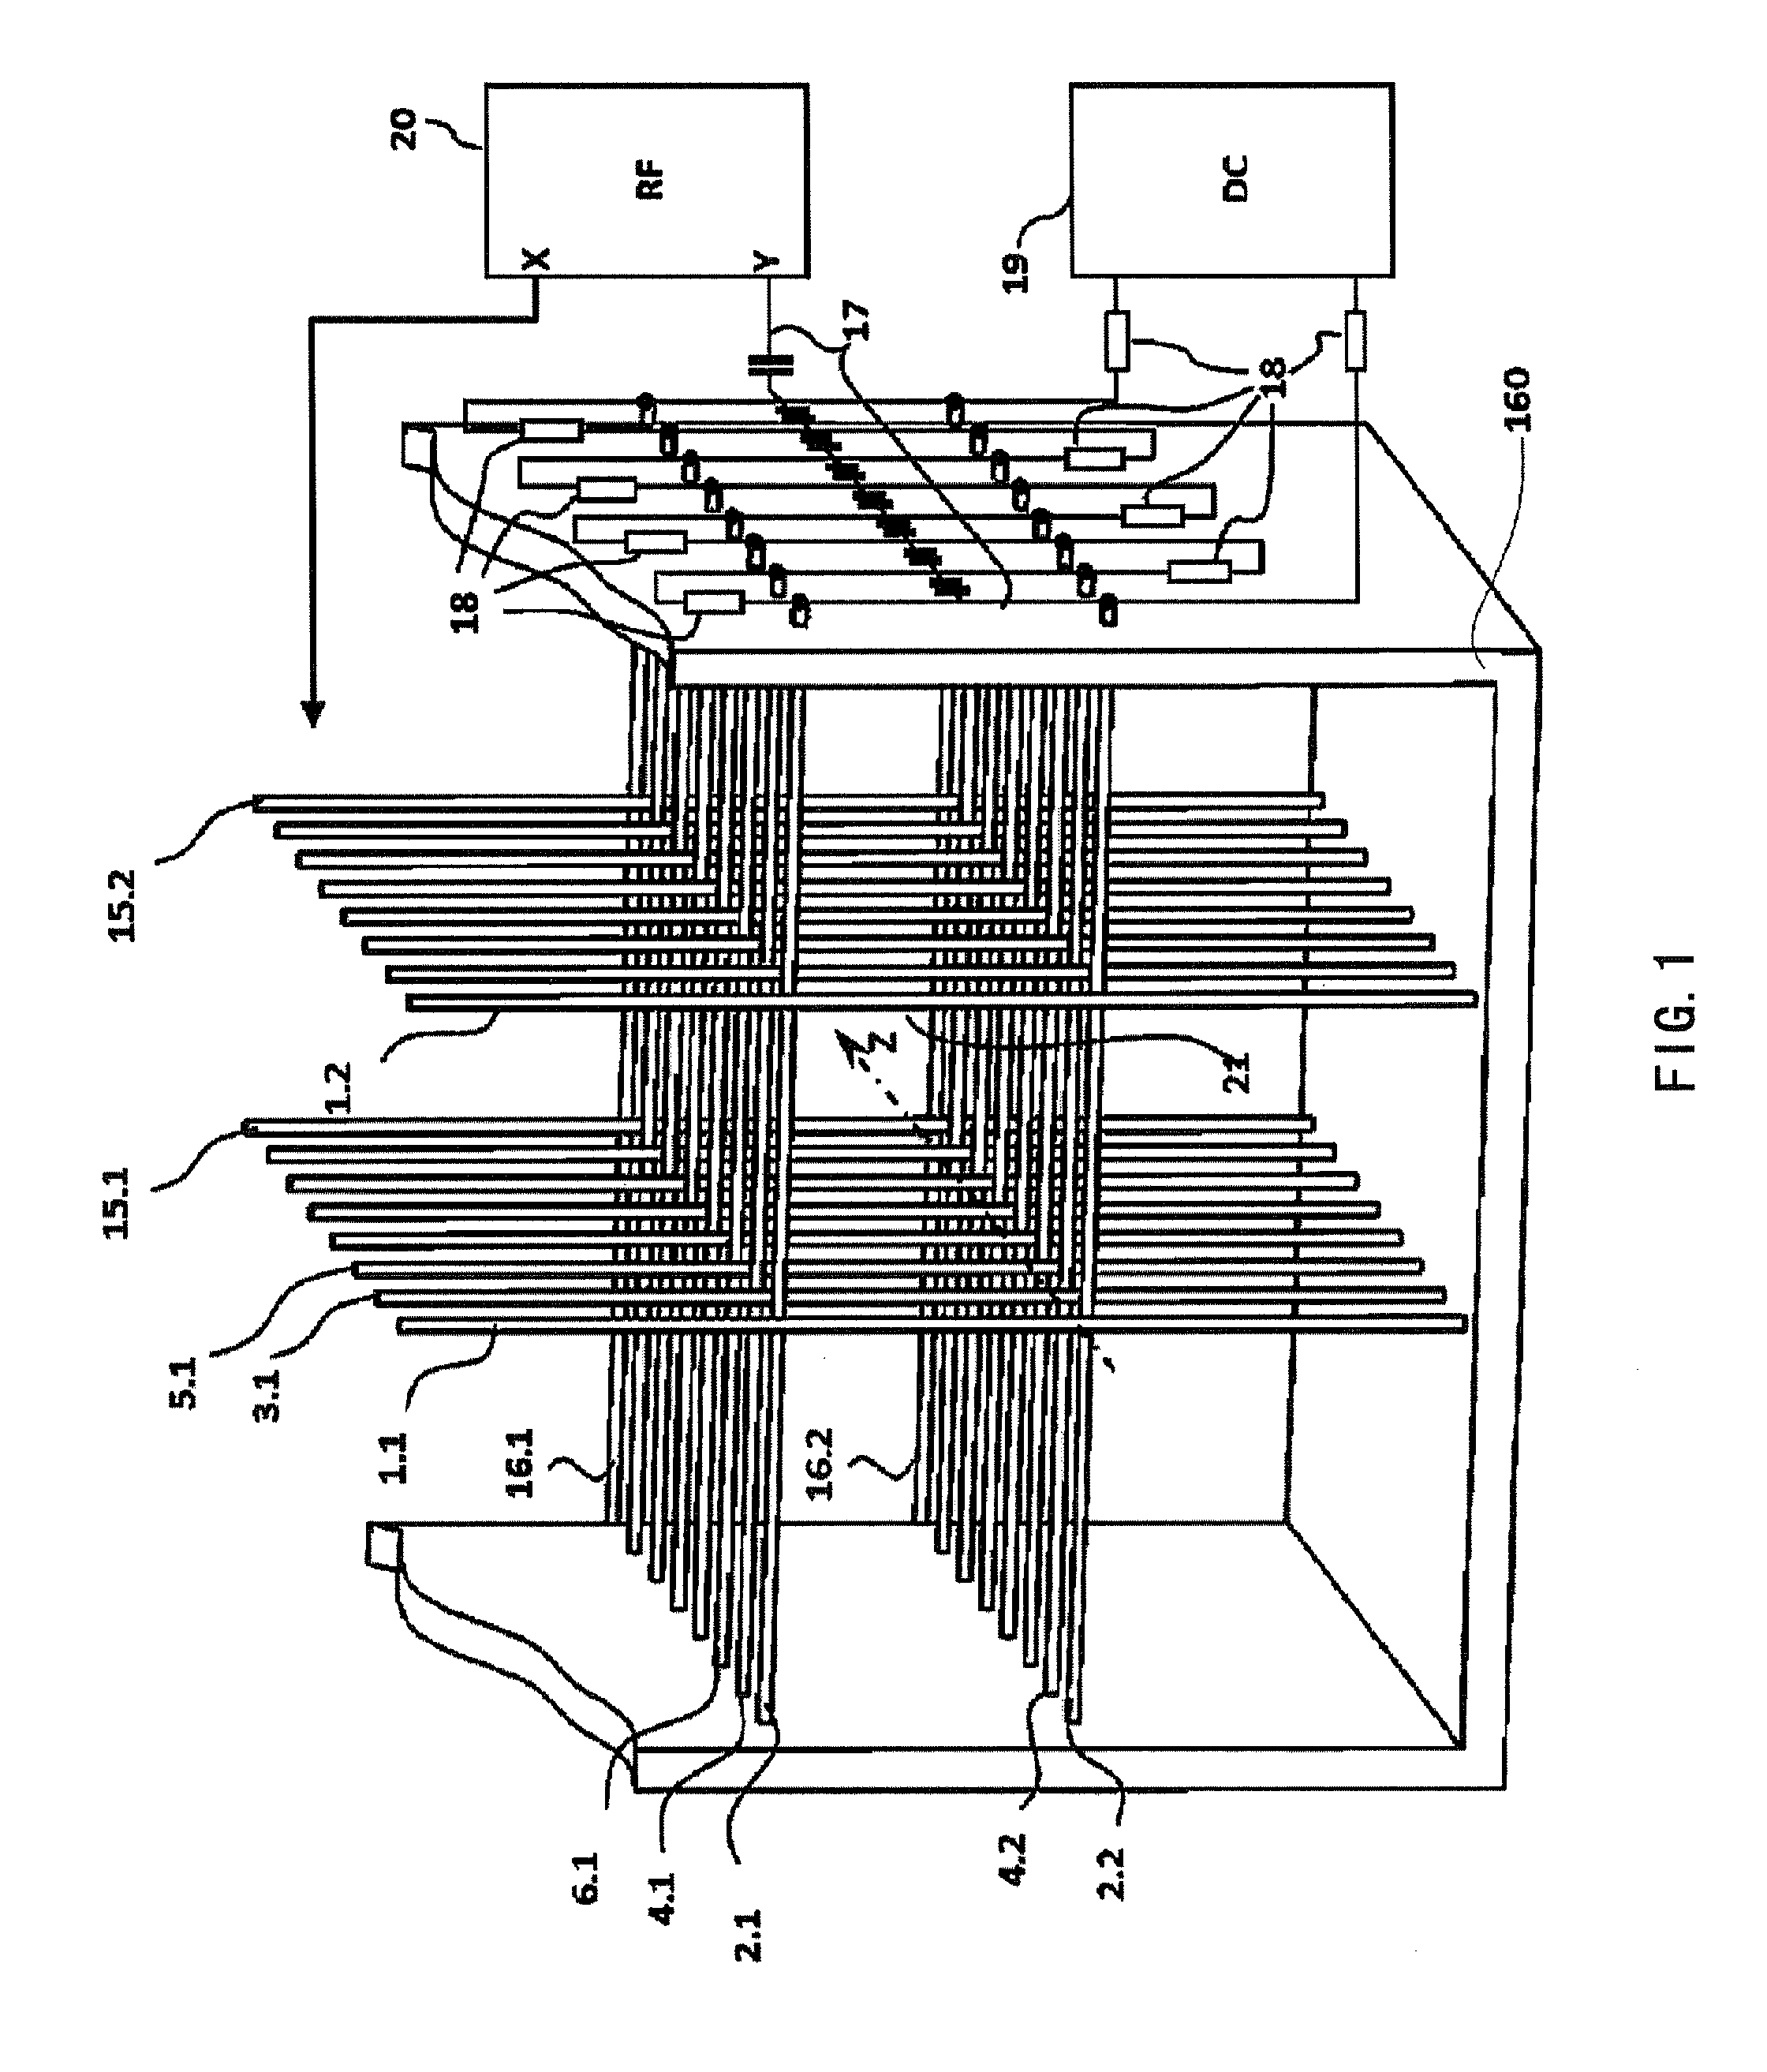 A wire electrode based ion guide device